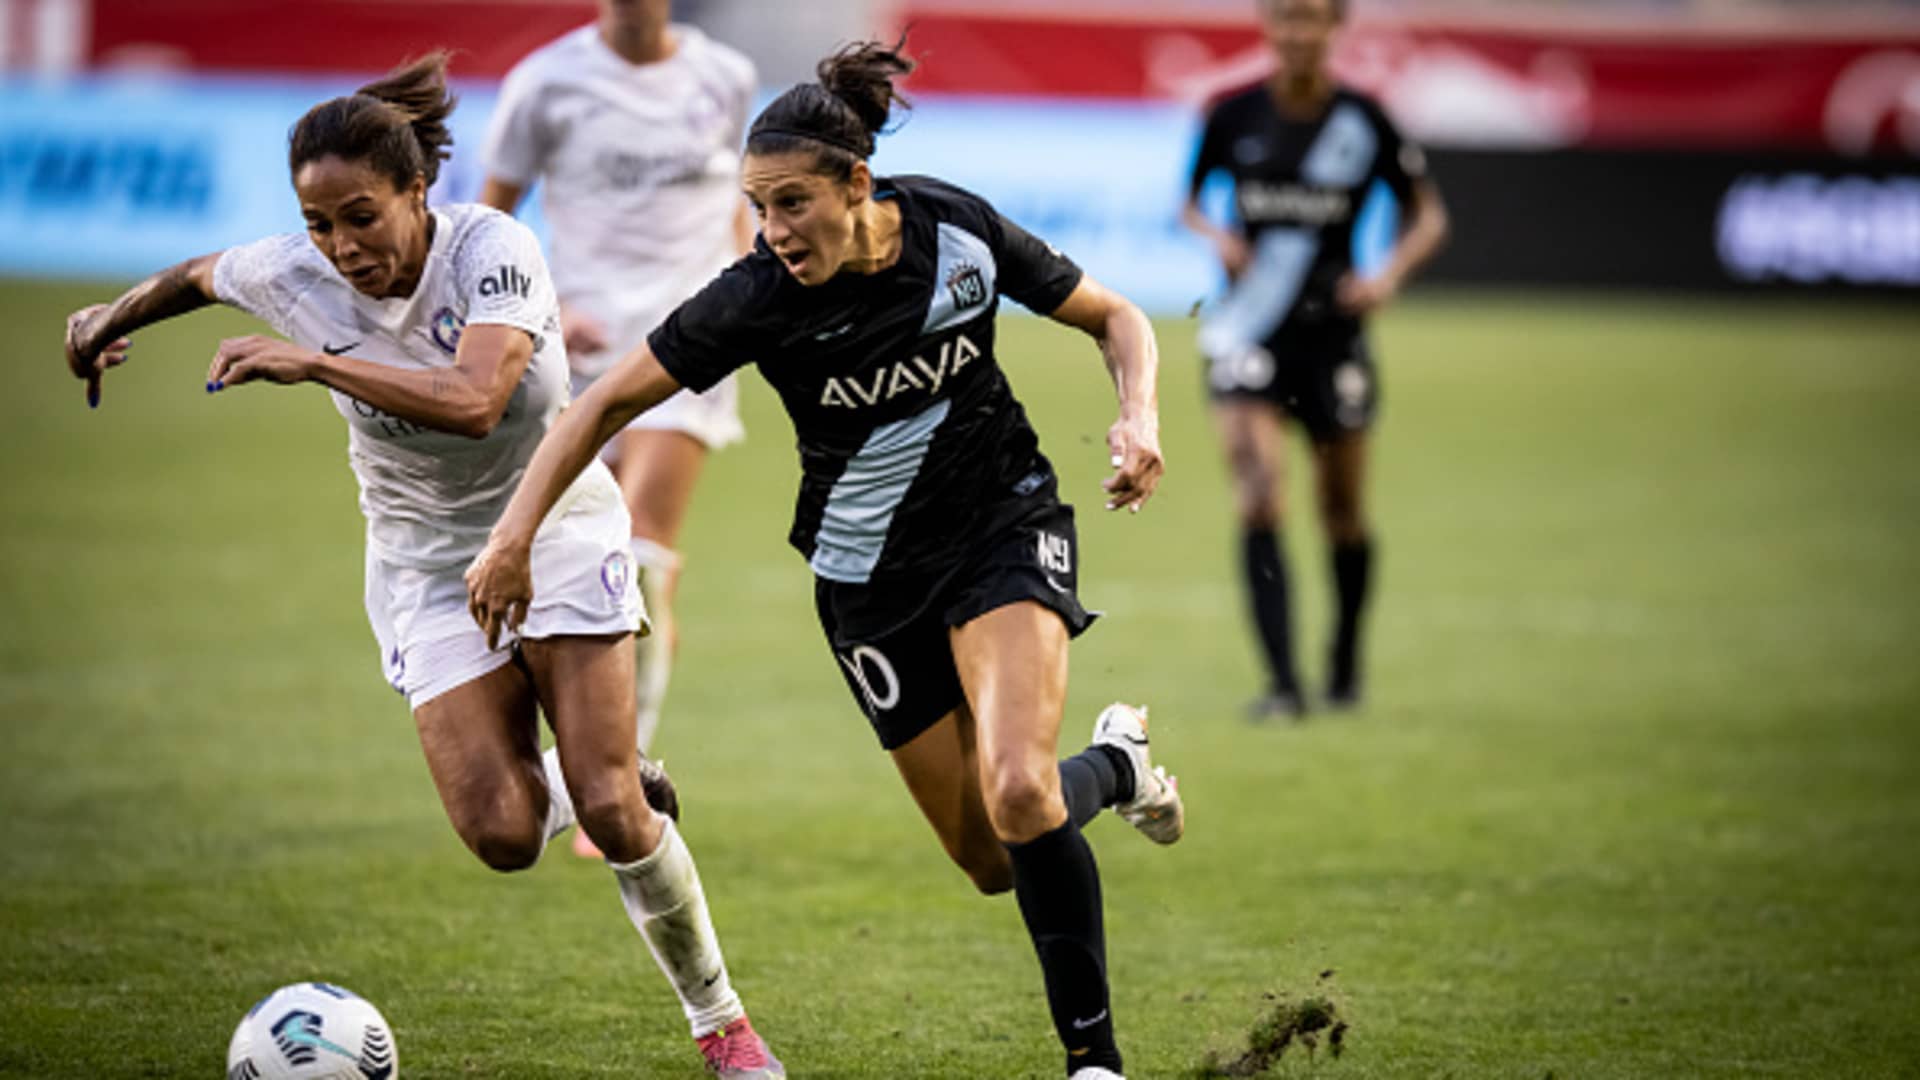 NWSL announces media partnerships with CBS, ESPN, Prime and Scripps